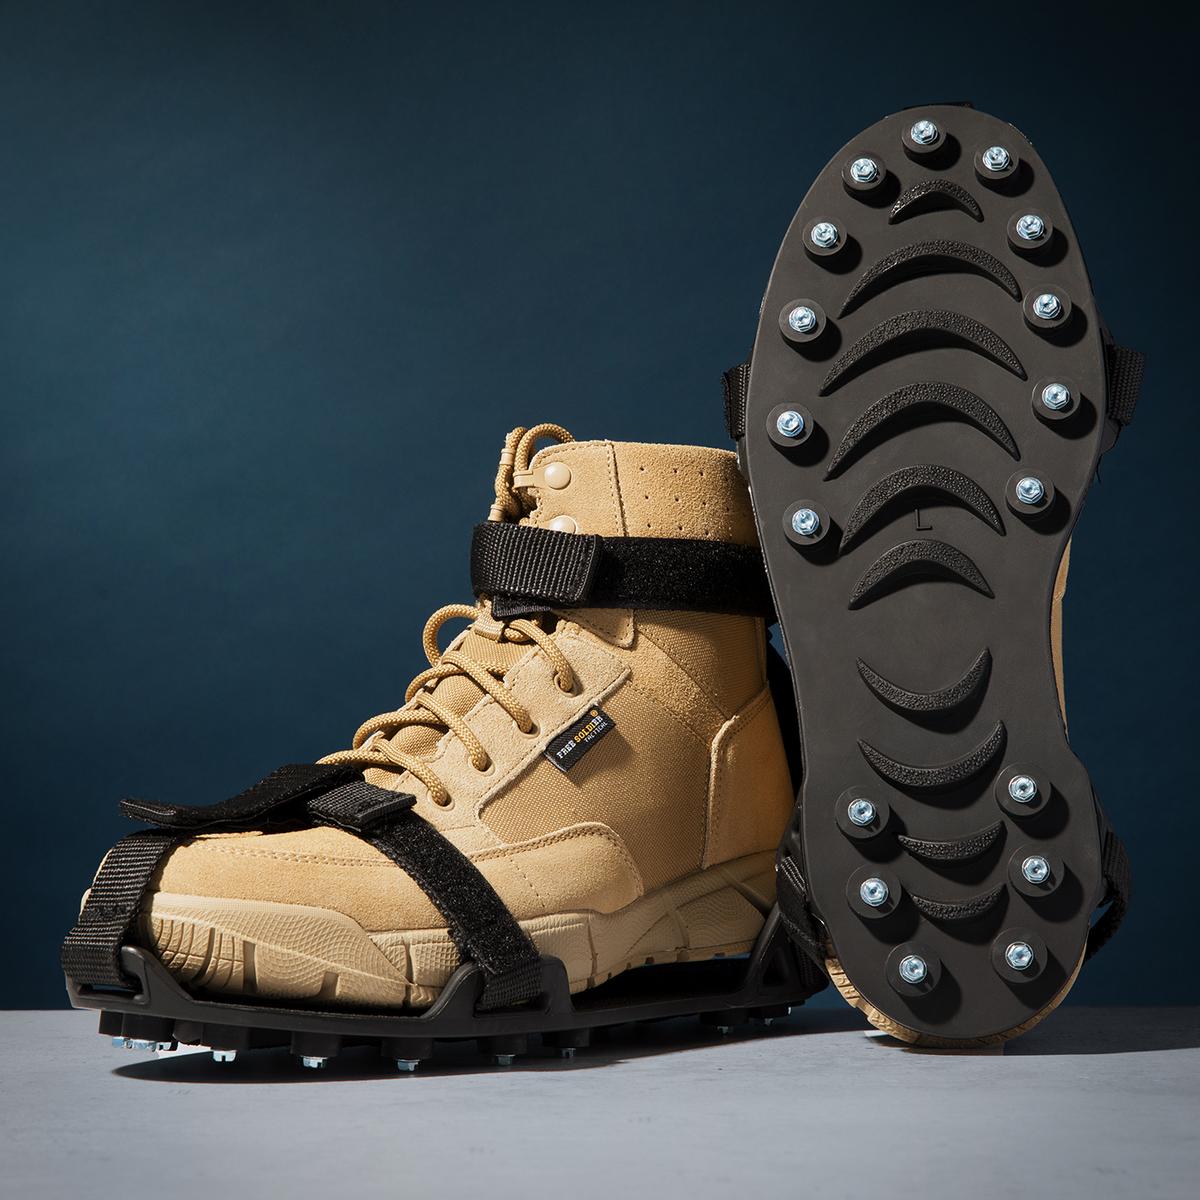 Action Traction Elite Hex Ice Cleats